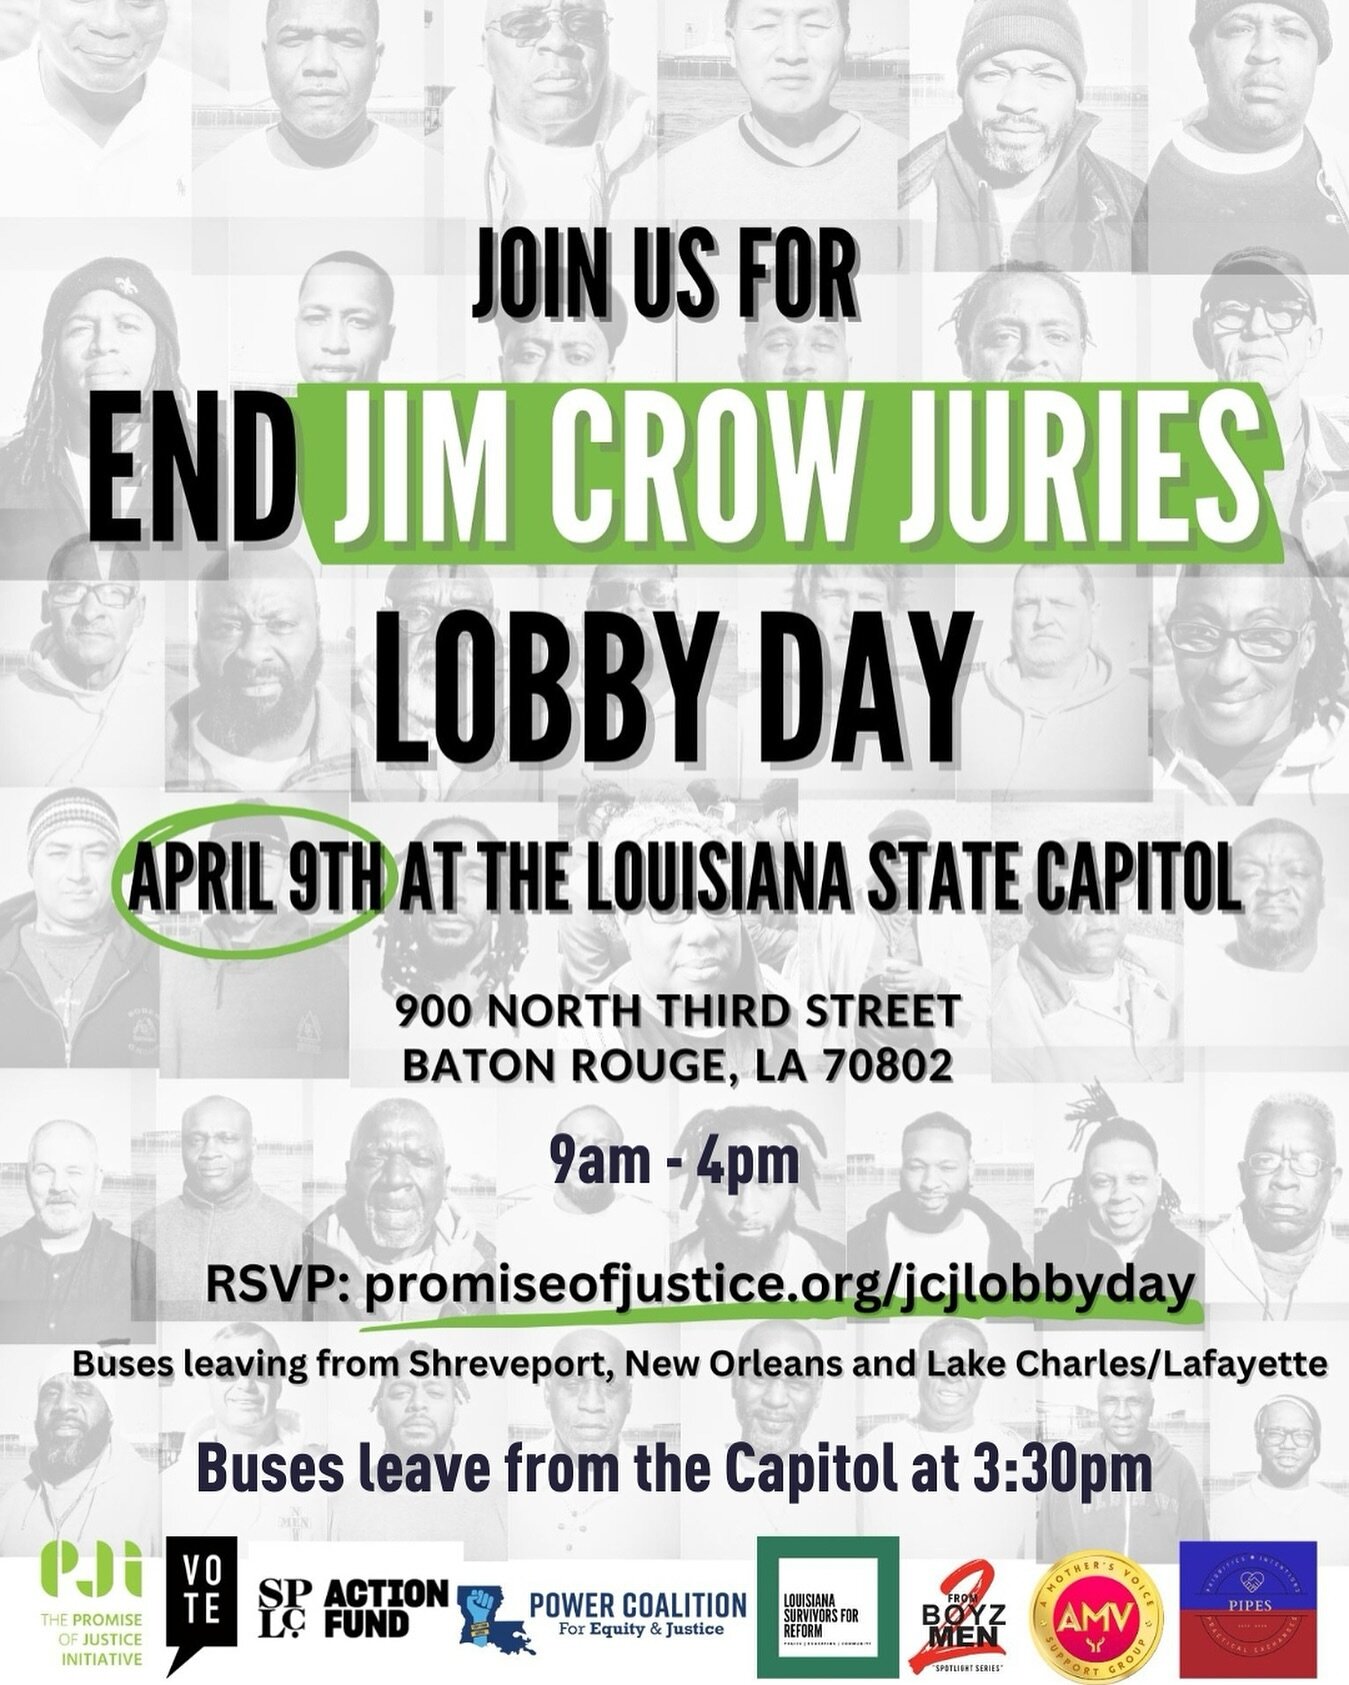 On Tuesday April 9th, people across the state, from Shreveport to New Orleans, Baton Rouge, Monroe, Lake Charles, Lafayette and more, are gathering at the Capitol to demand an End to Jim Crow Juries.&nbsp;Join us!

Illegal non-unanimous jury convicti